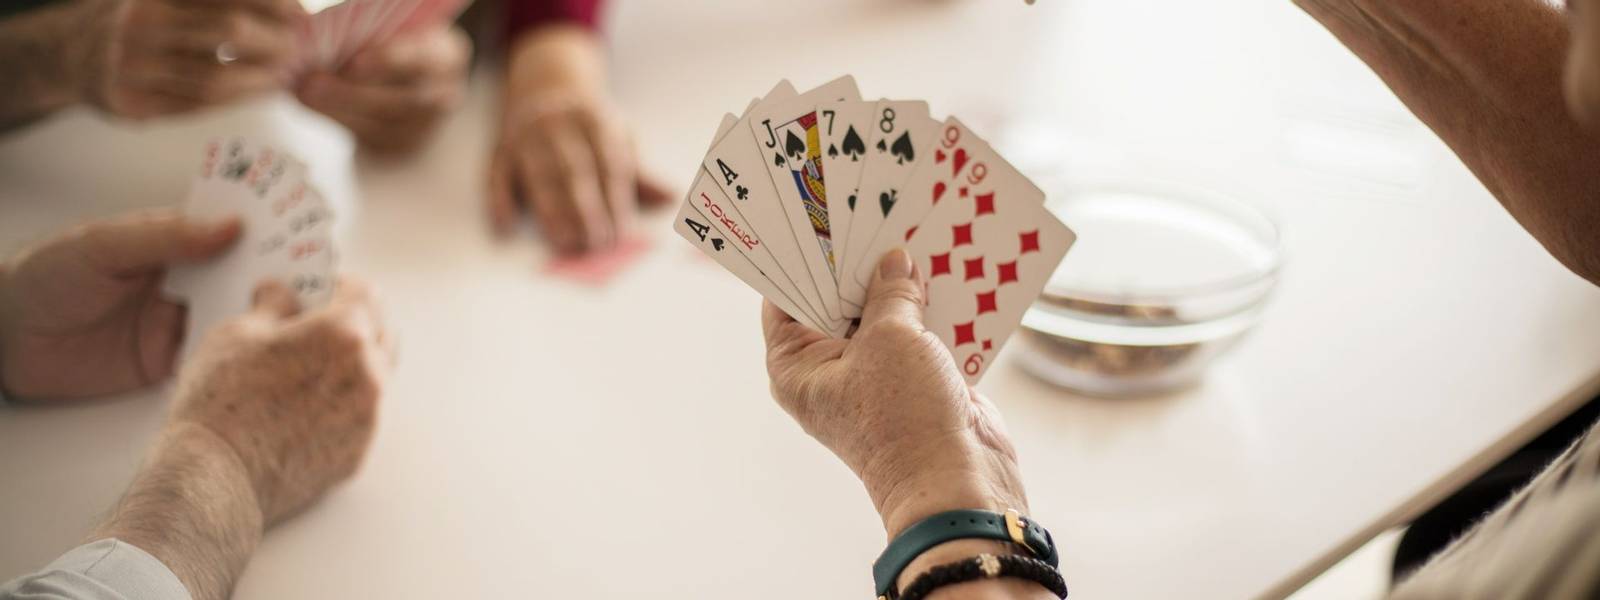 I can do something with this hand. Senior people playing cards at home. Focus is on hands.